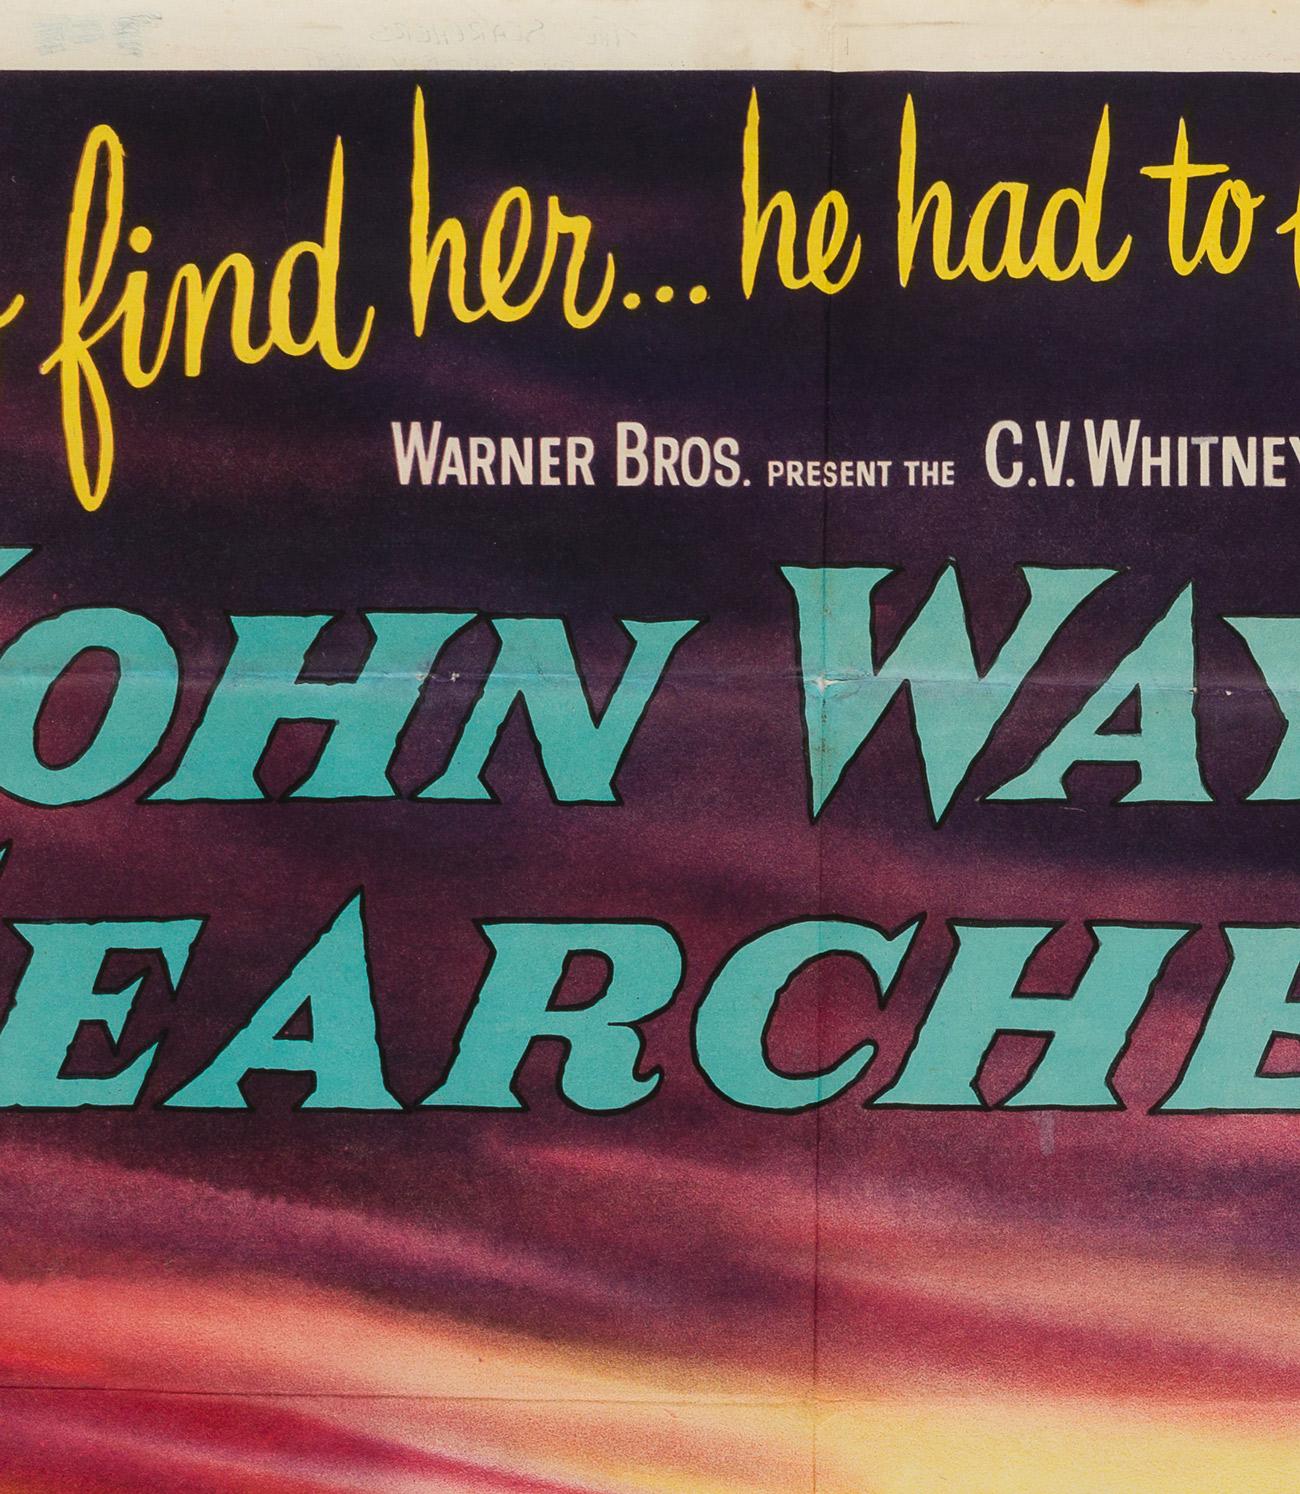 the searchers poster